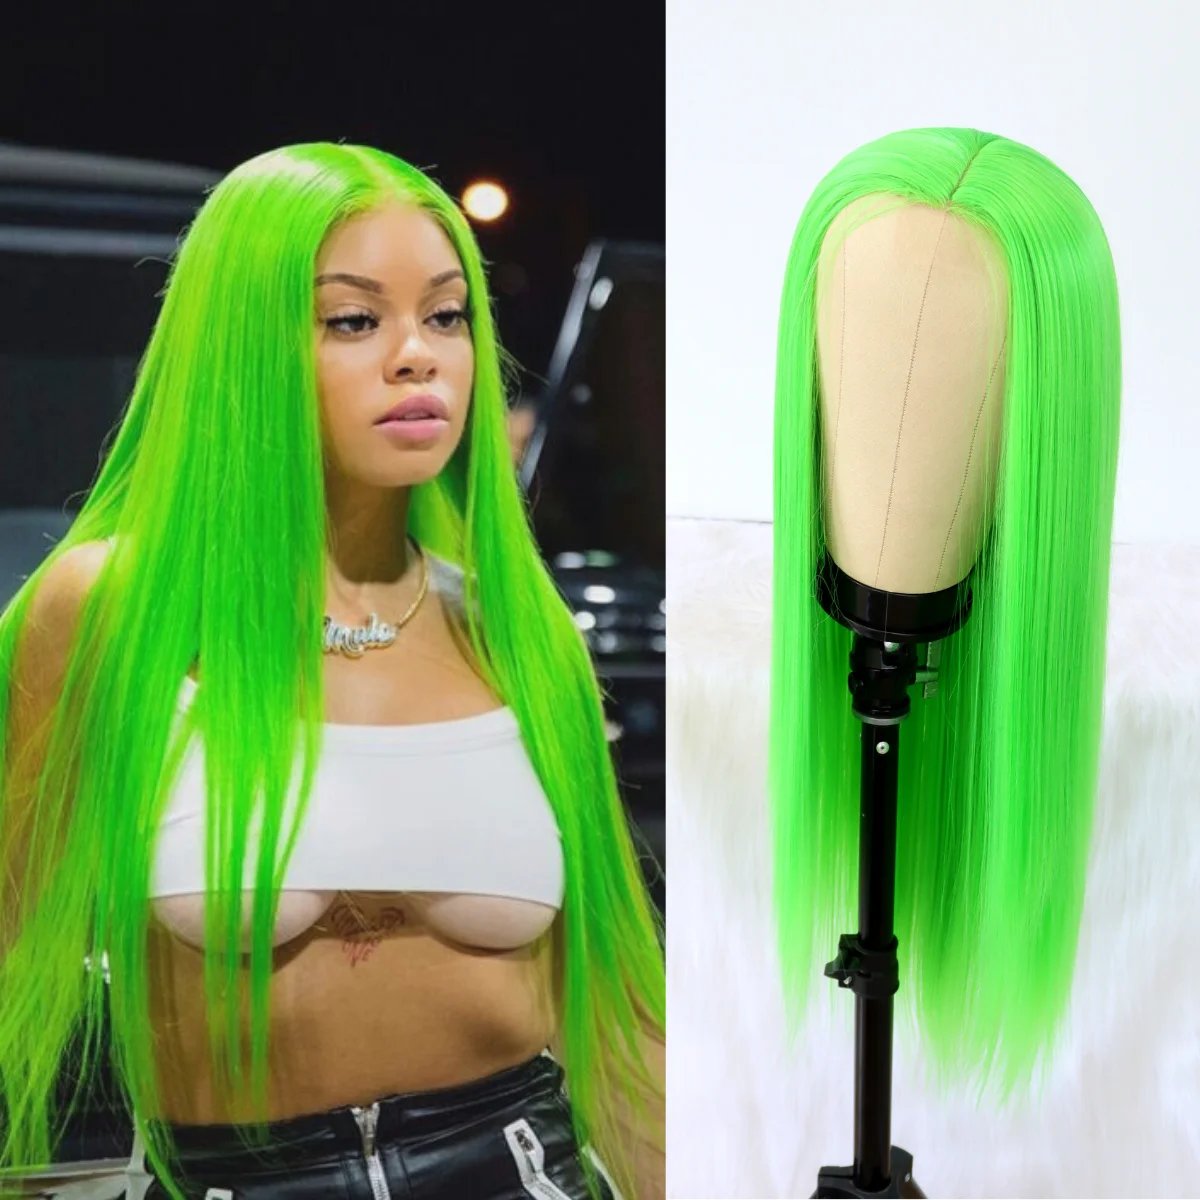 Lace Wigs Long Straight Hair Lime Green Color Wigs For Fashion Women Synthetic Lace Wigs With Natural Hairline